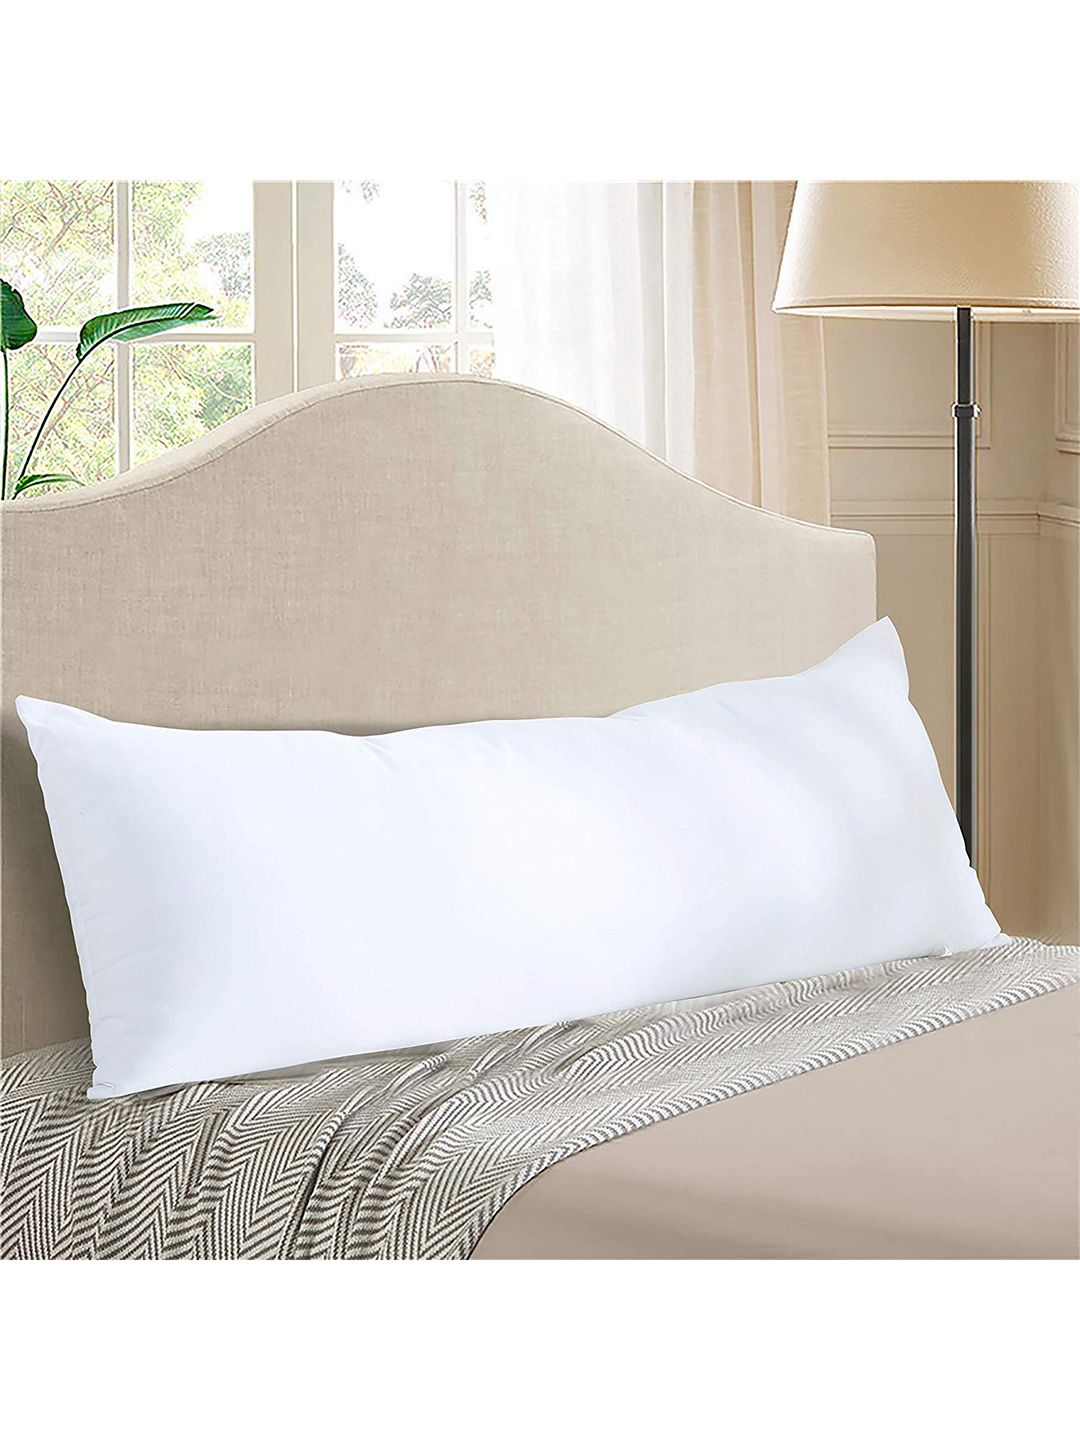 Pum Pum White Solid Pillows With Cover Price in India